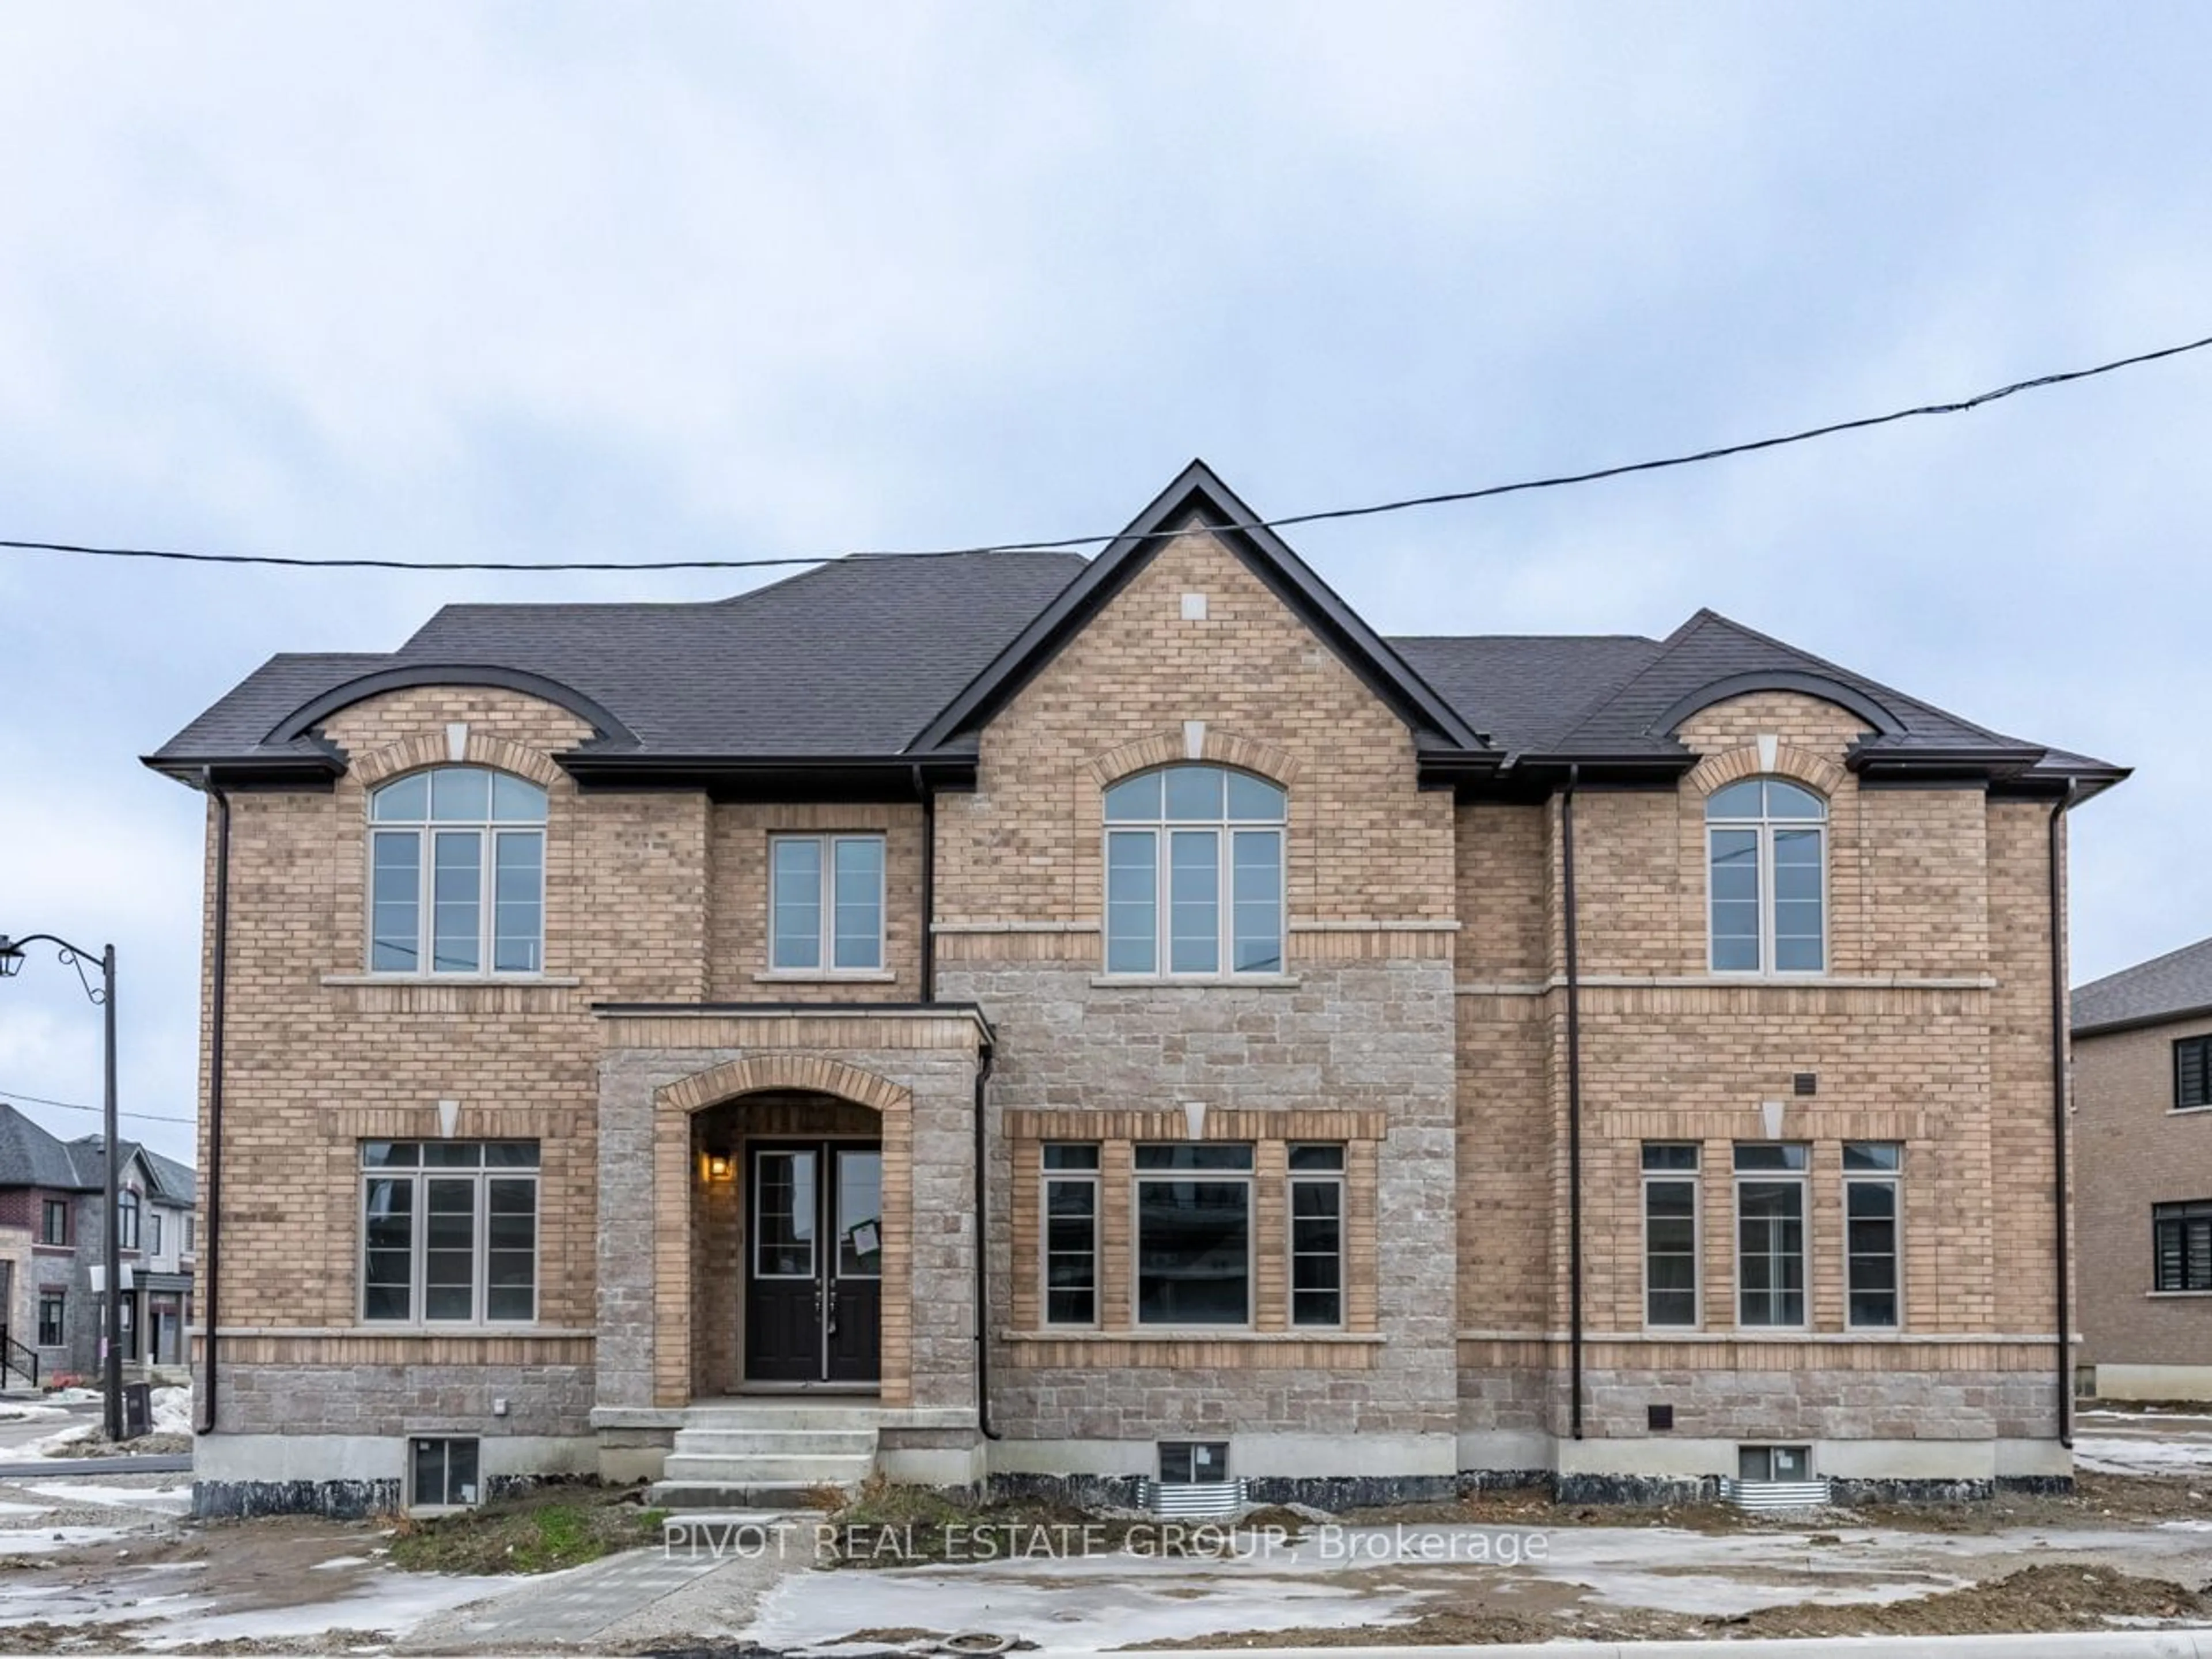 Home with brick exterior material for 60 Lipscott Dr, Caledon Ontario L7C 4K1